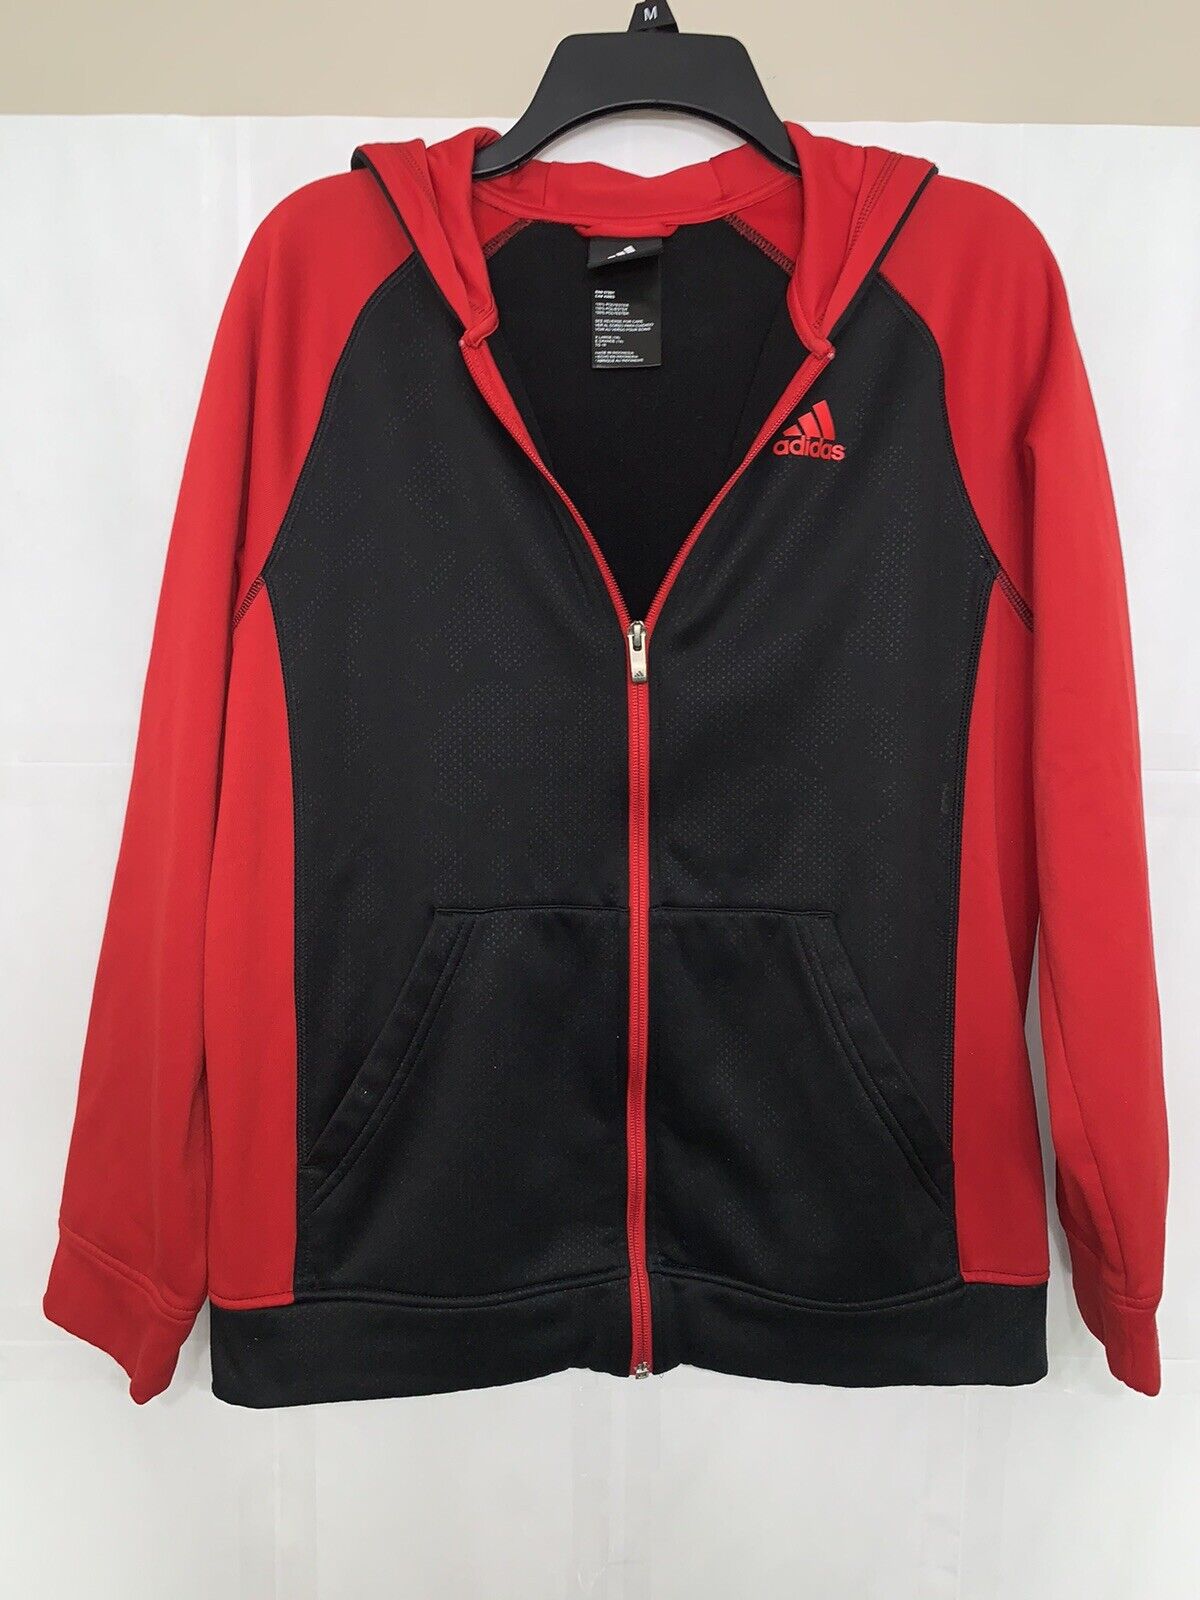 Adidas Climawarm Youth Xl (18) Red/black Full Zip Track Jacket Long Sleeve